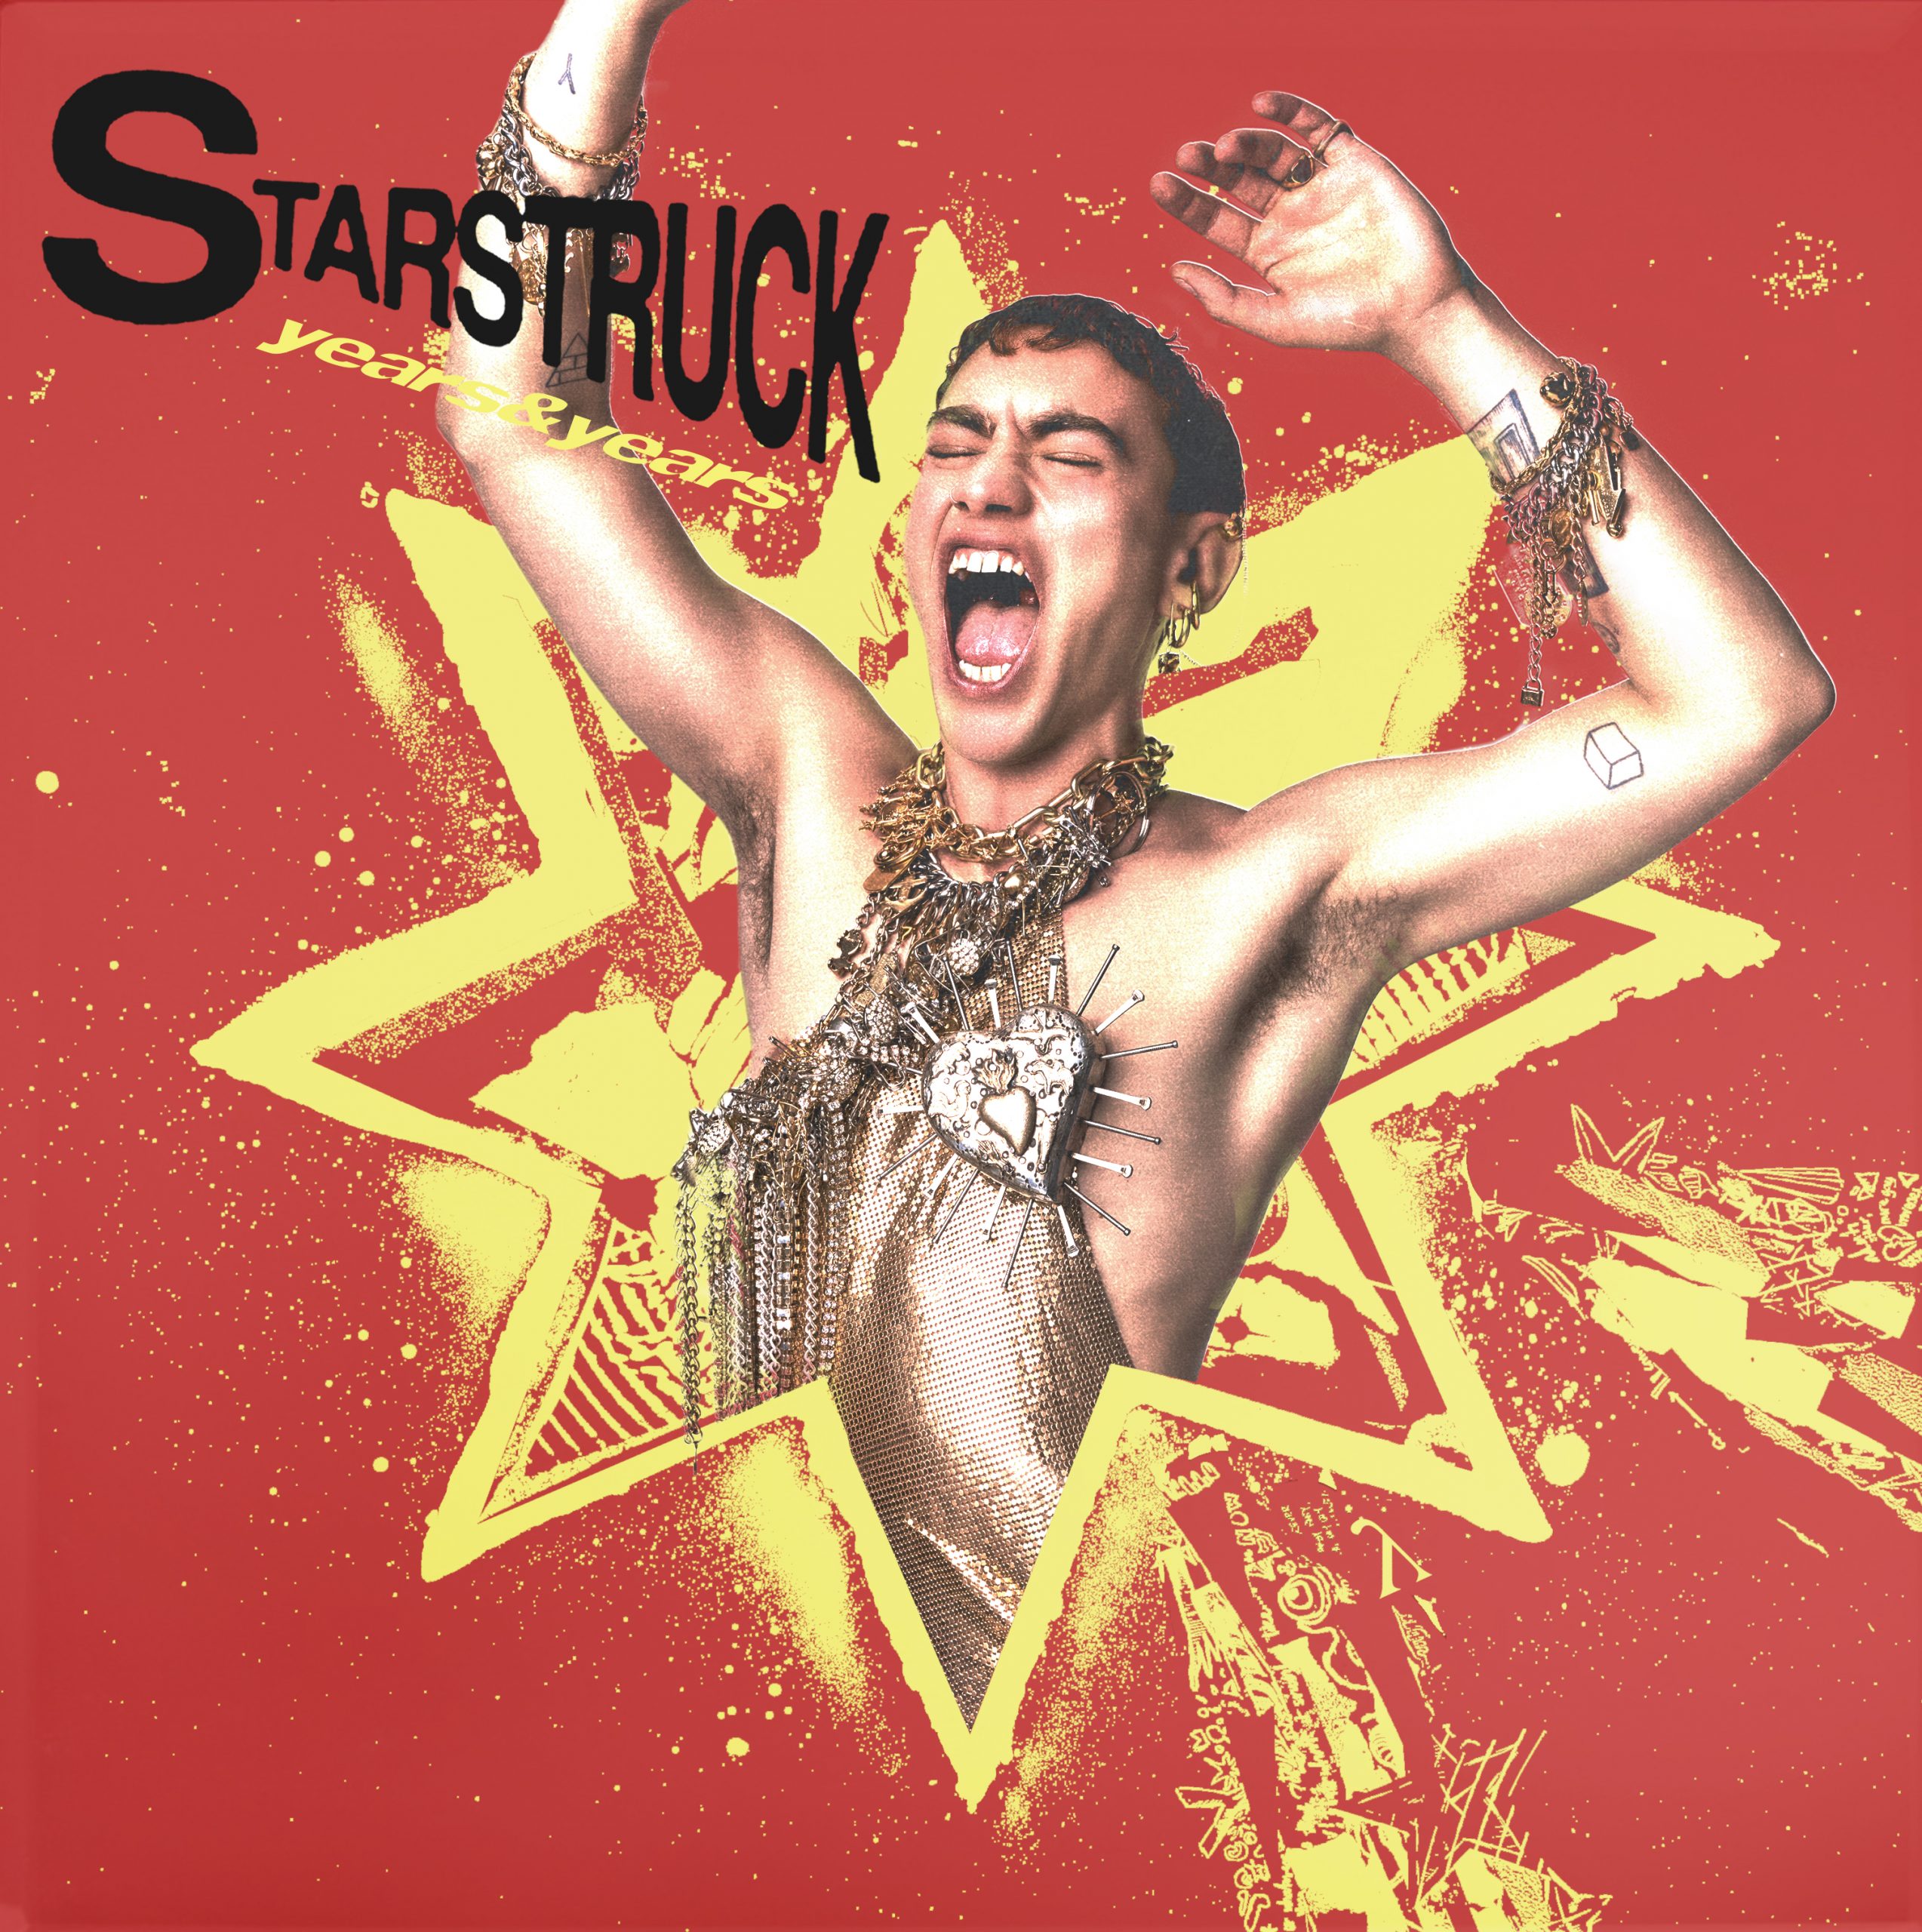 Co-Written by Coffee!  “Starstruck” by Years & Years hits #1 on UK Radio Airplay Chart!